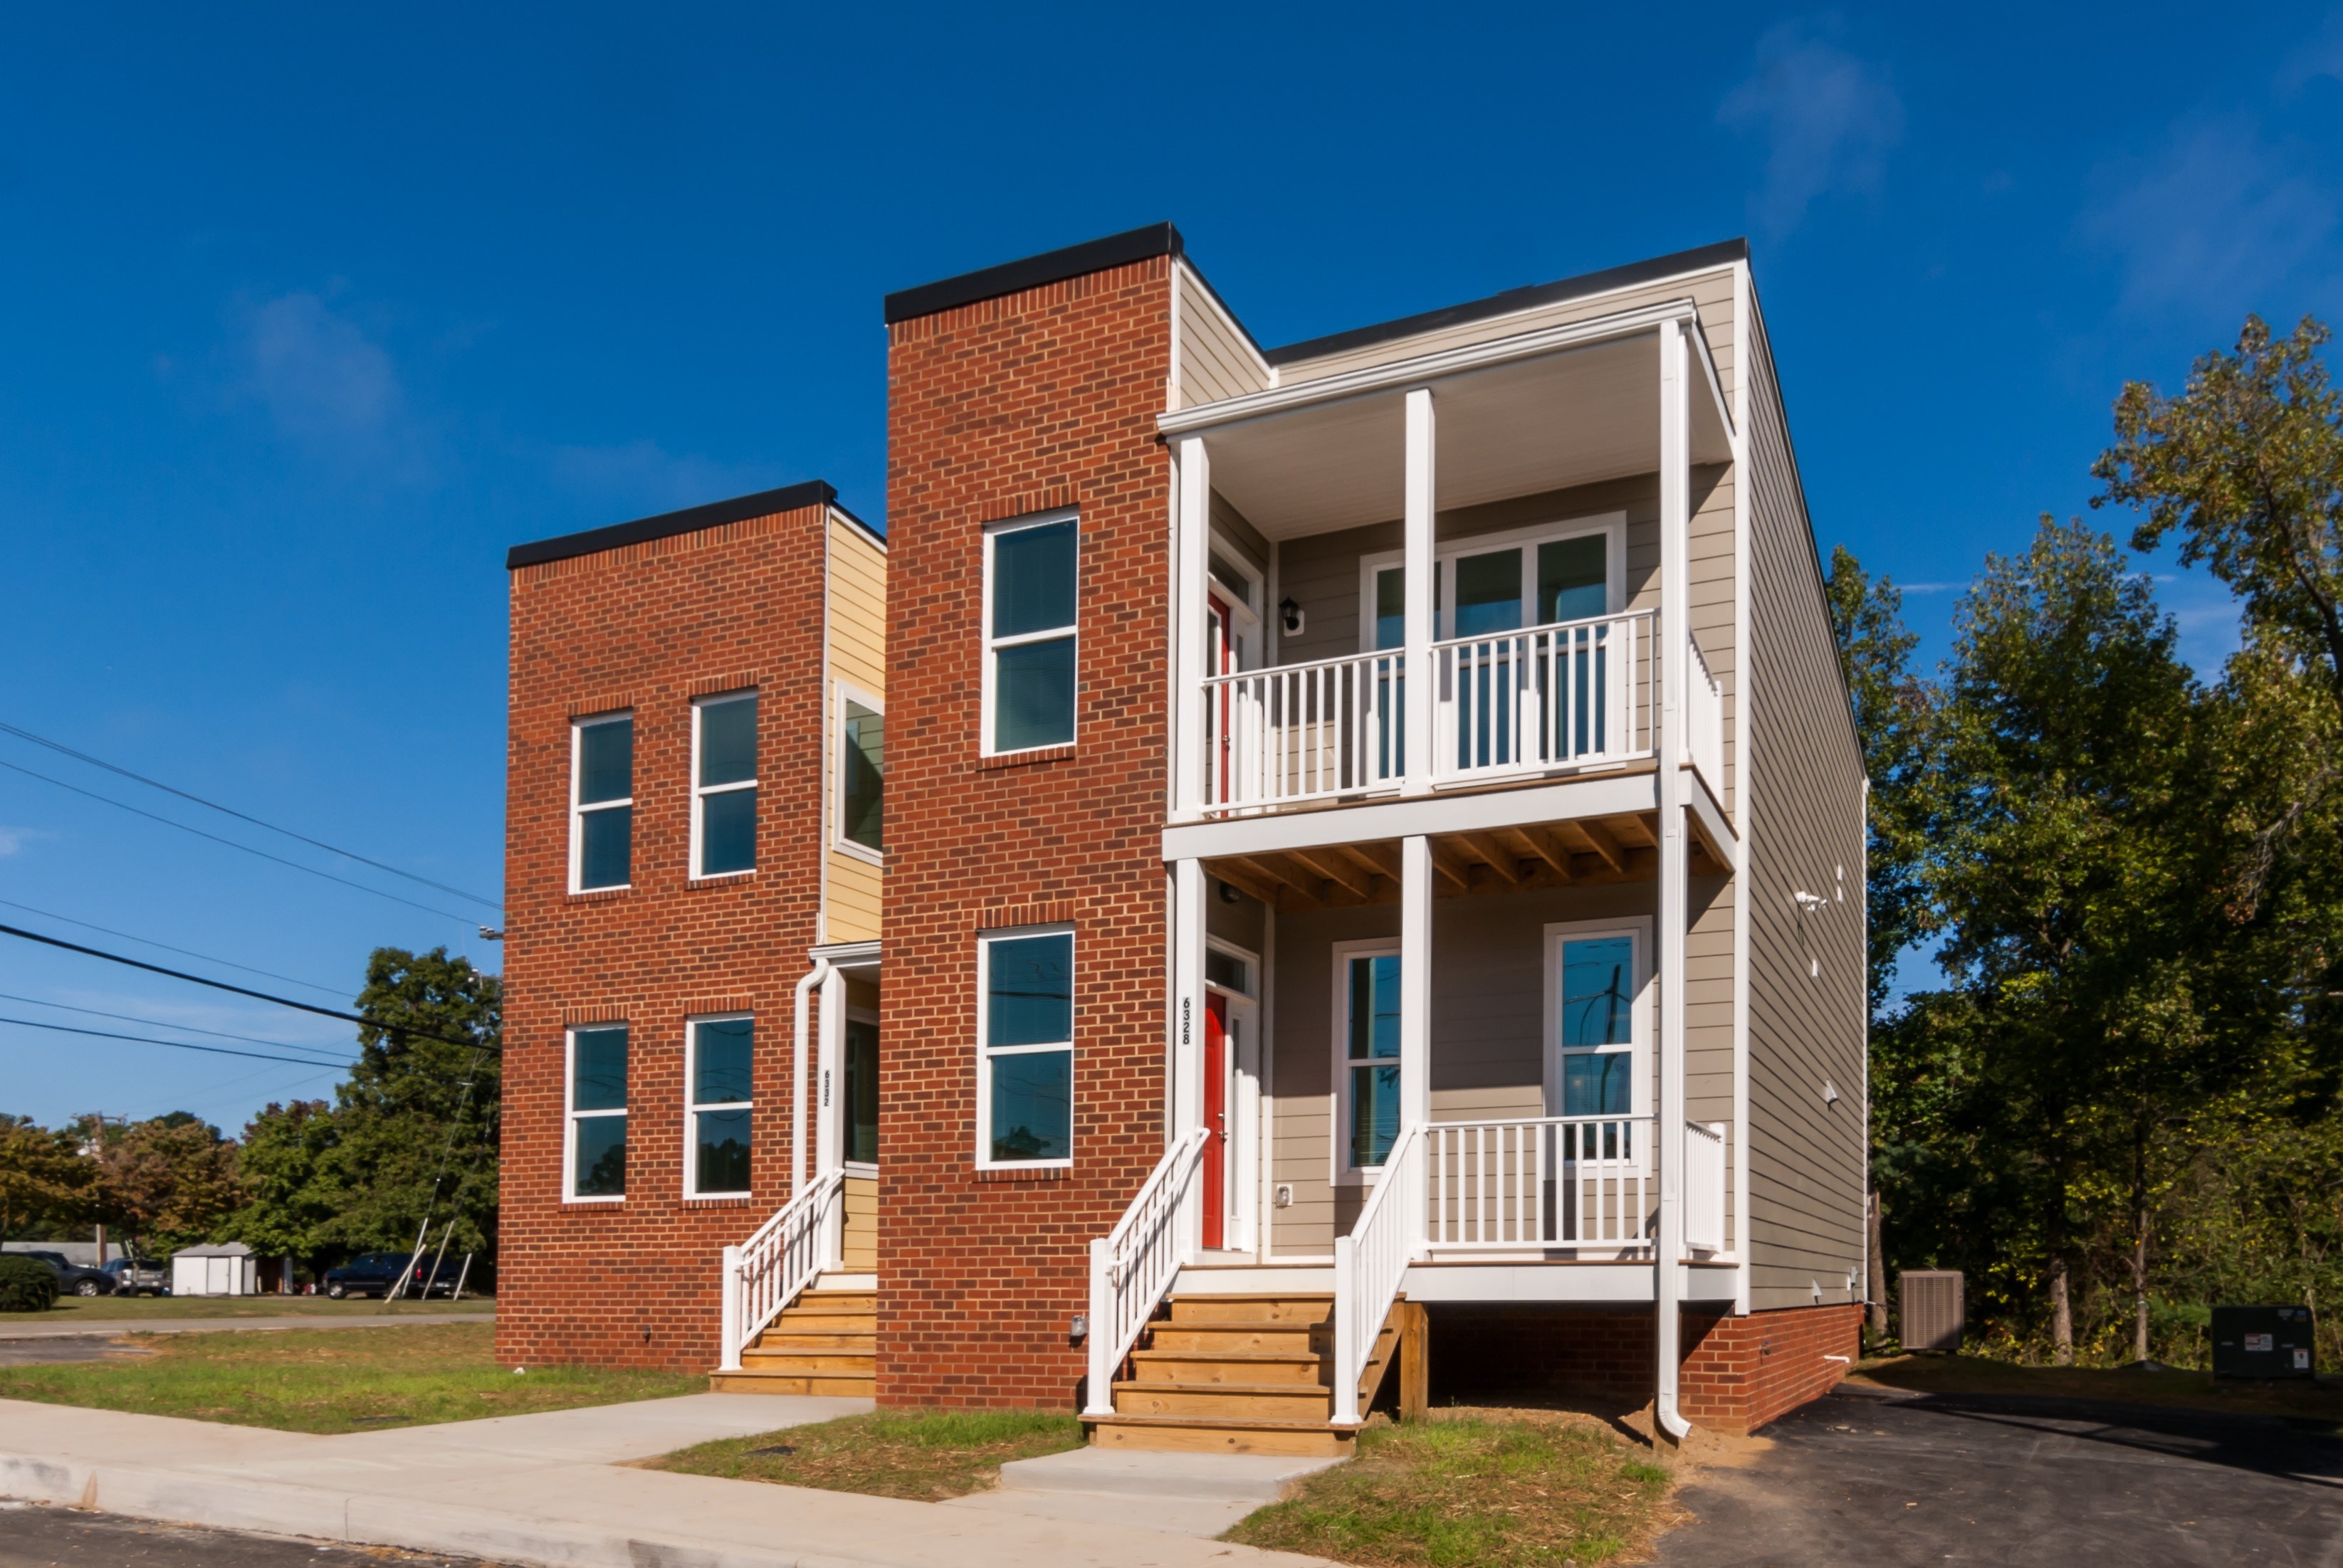 Townhomes at Warwick Place